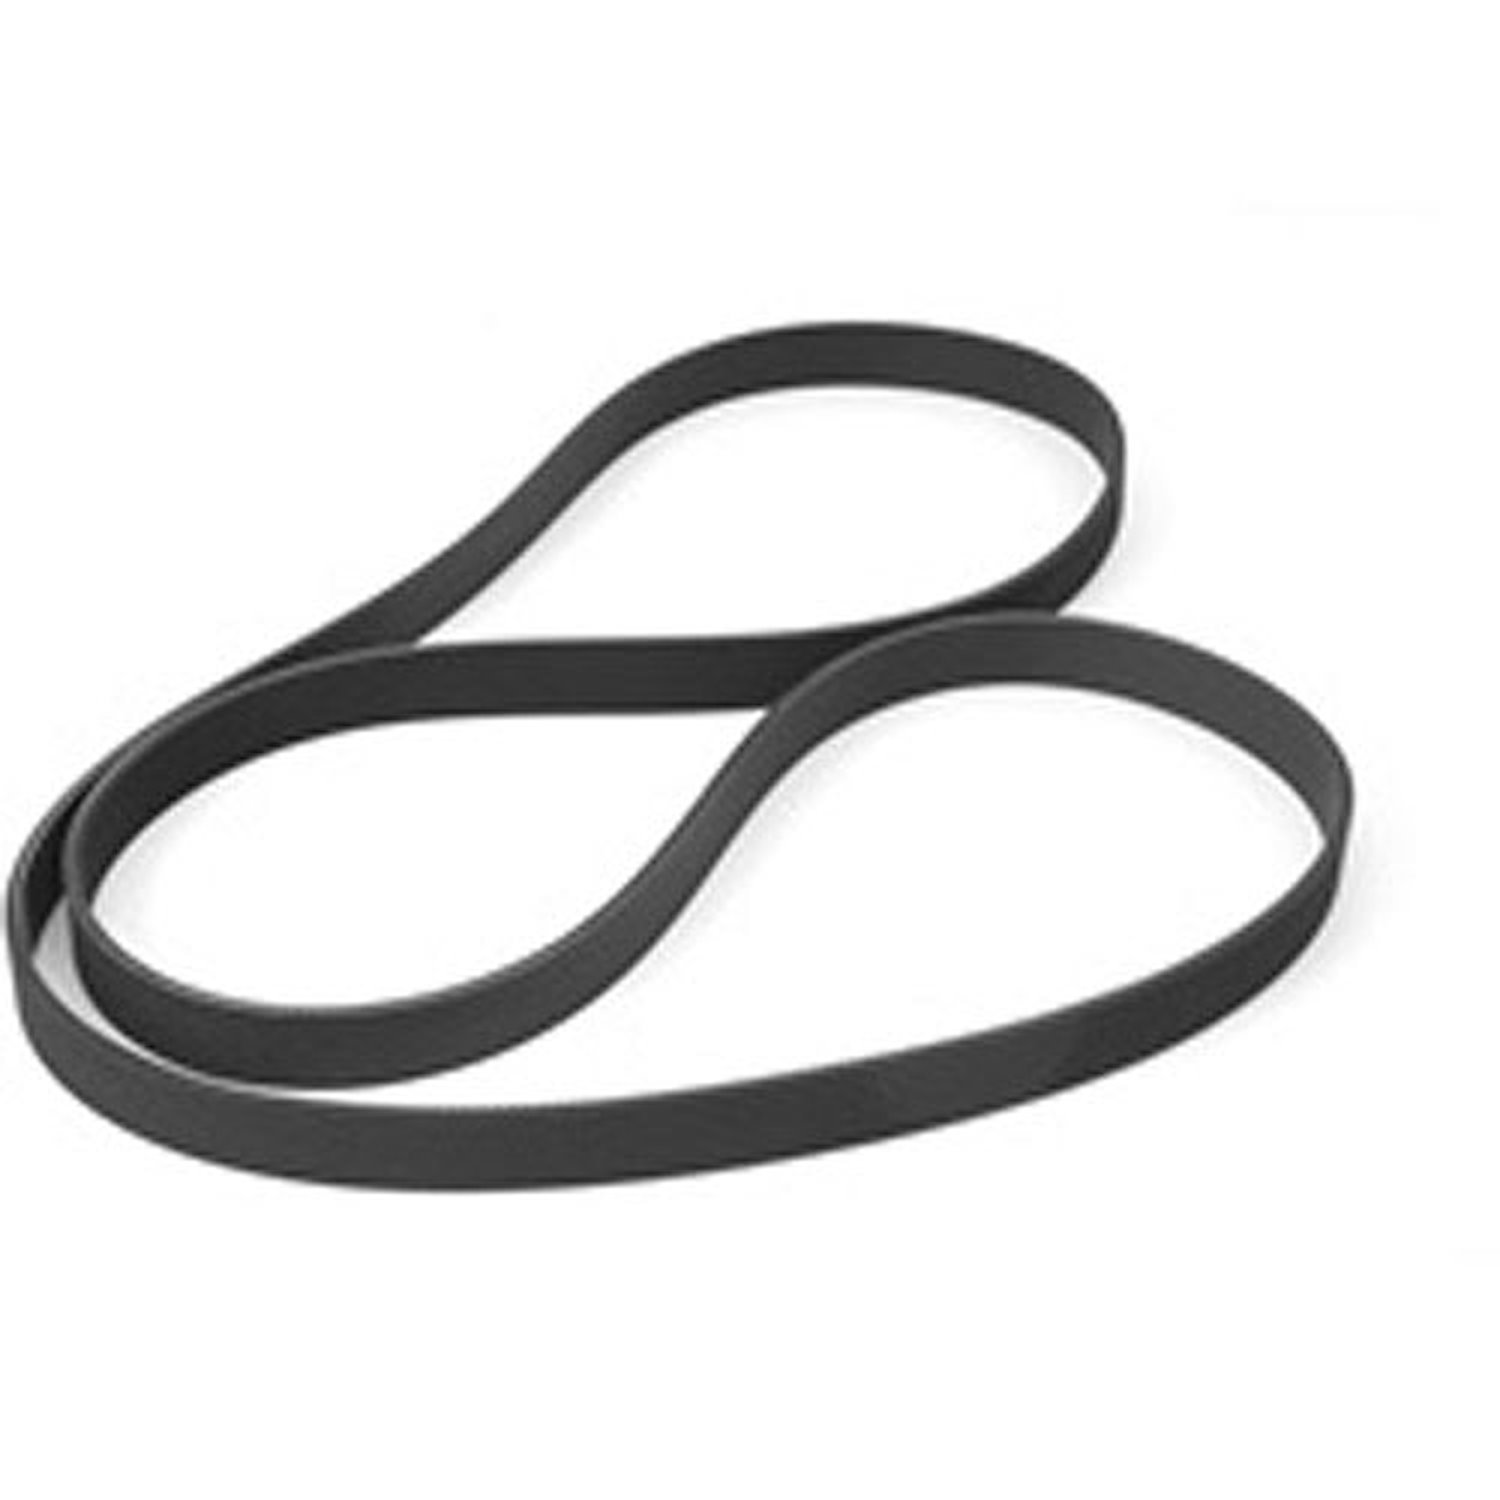 Replacement serpentine belt from Omix-ADA 12-16 Jeep Wrangler with 3.6 liter engine.